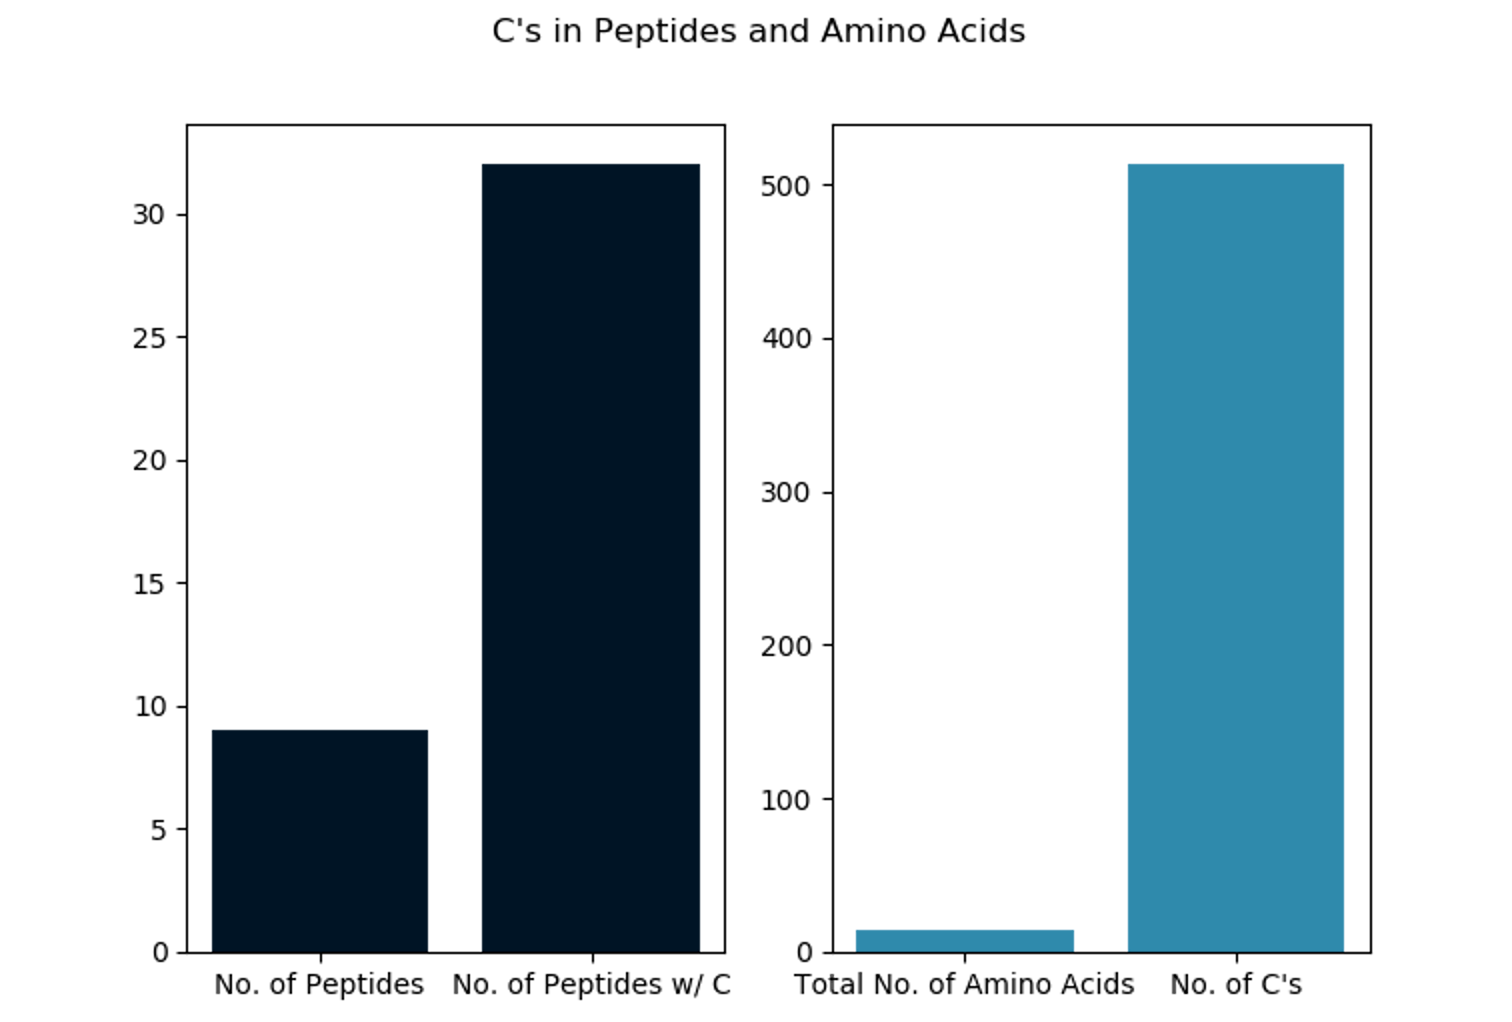 Barplot charts showing the number of cysteines in peptides and amino acids